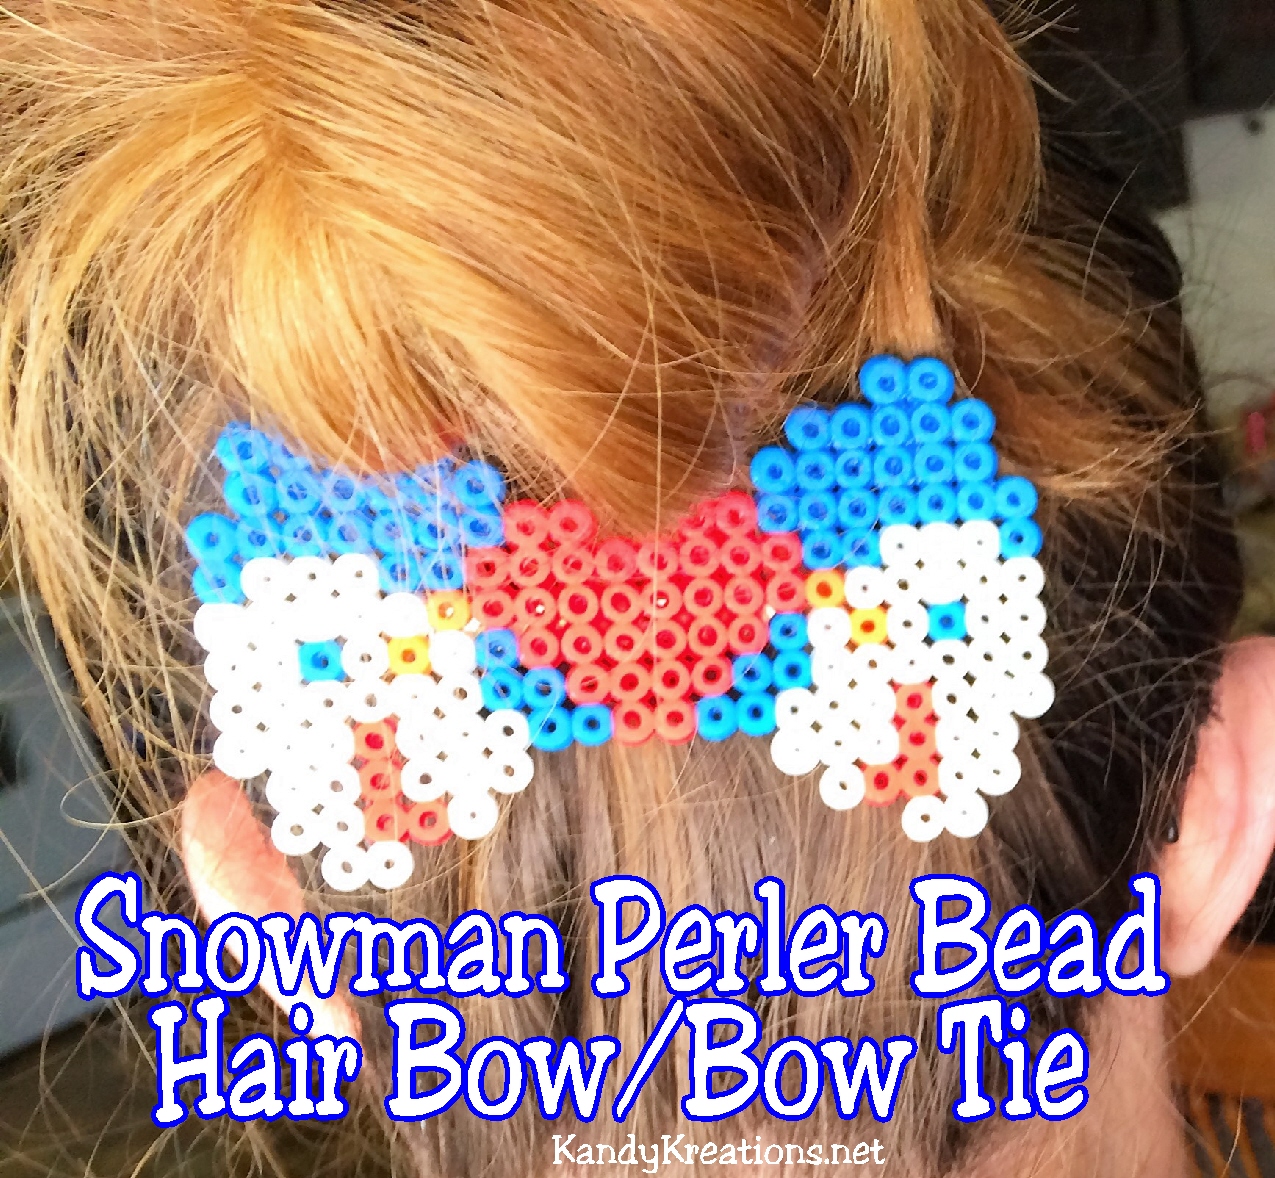 How to put on hair beads with a DIY Hair Beader 